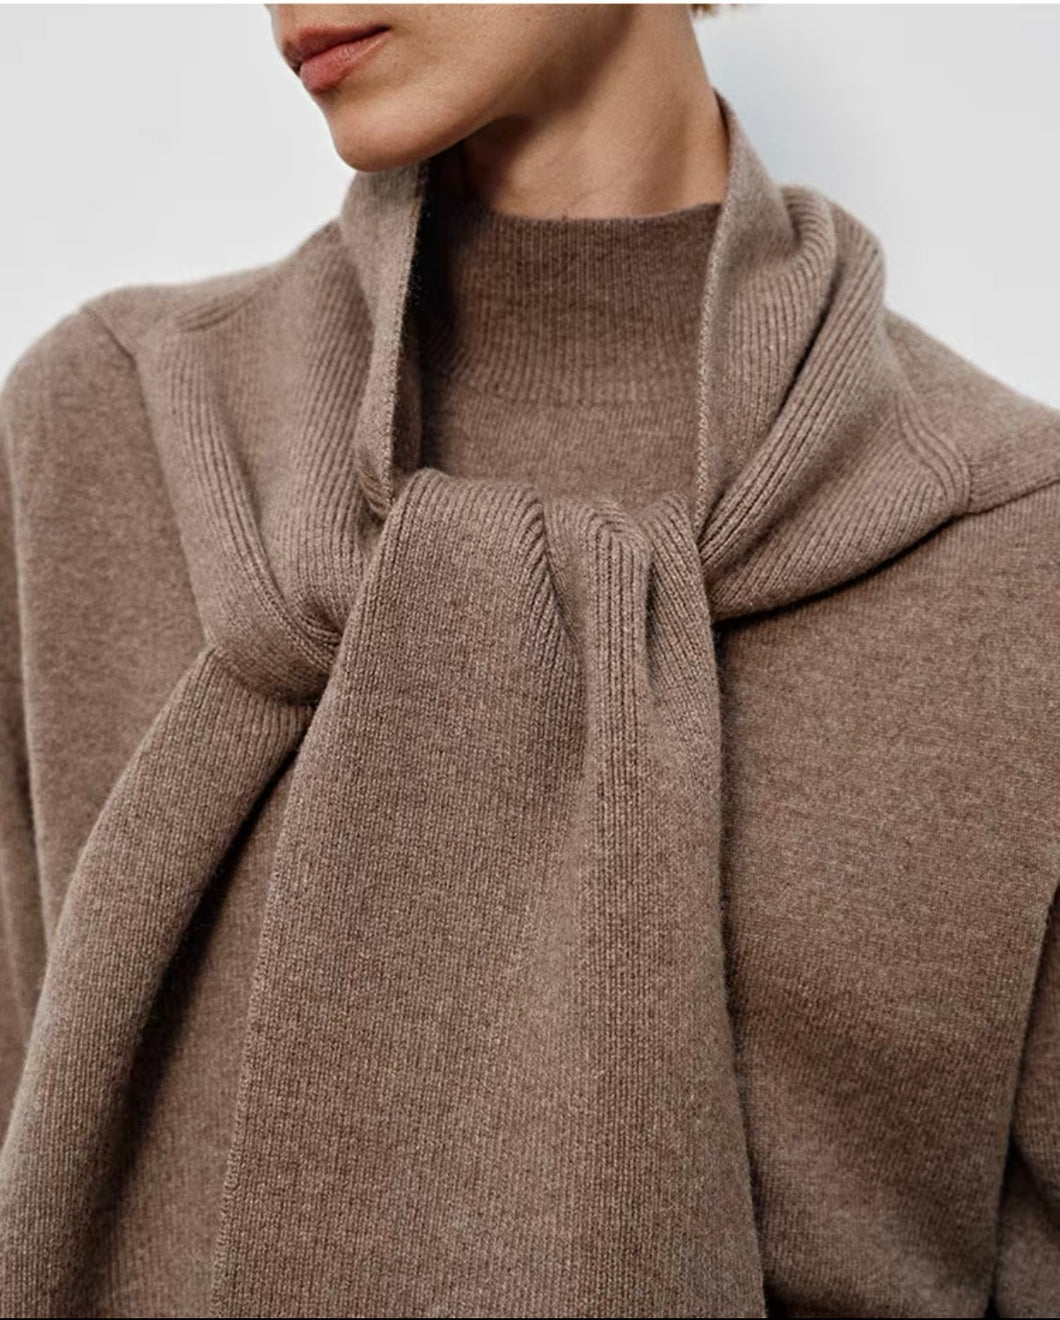 Lux Draped Cowl Neck Sweater